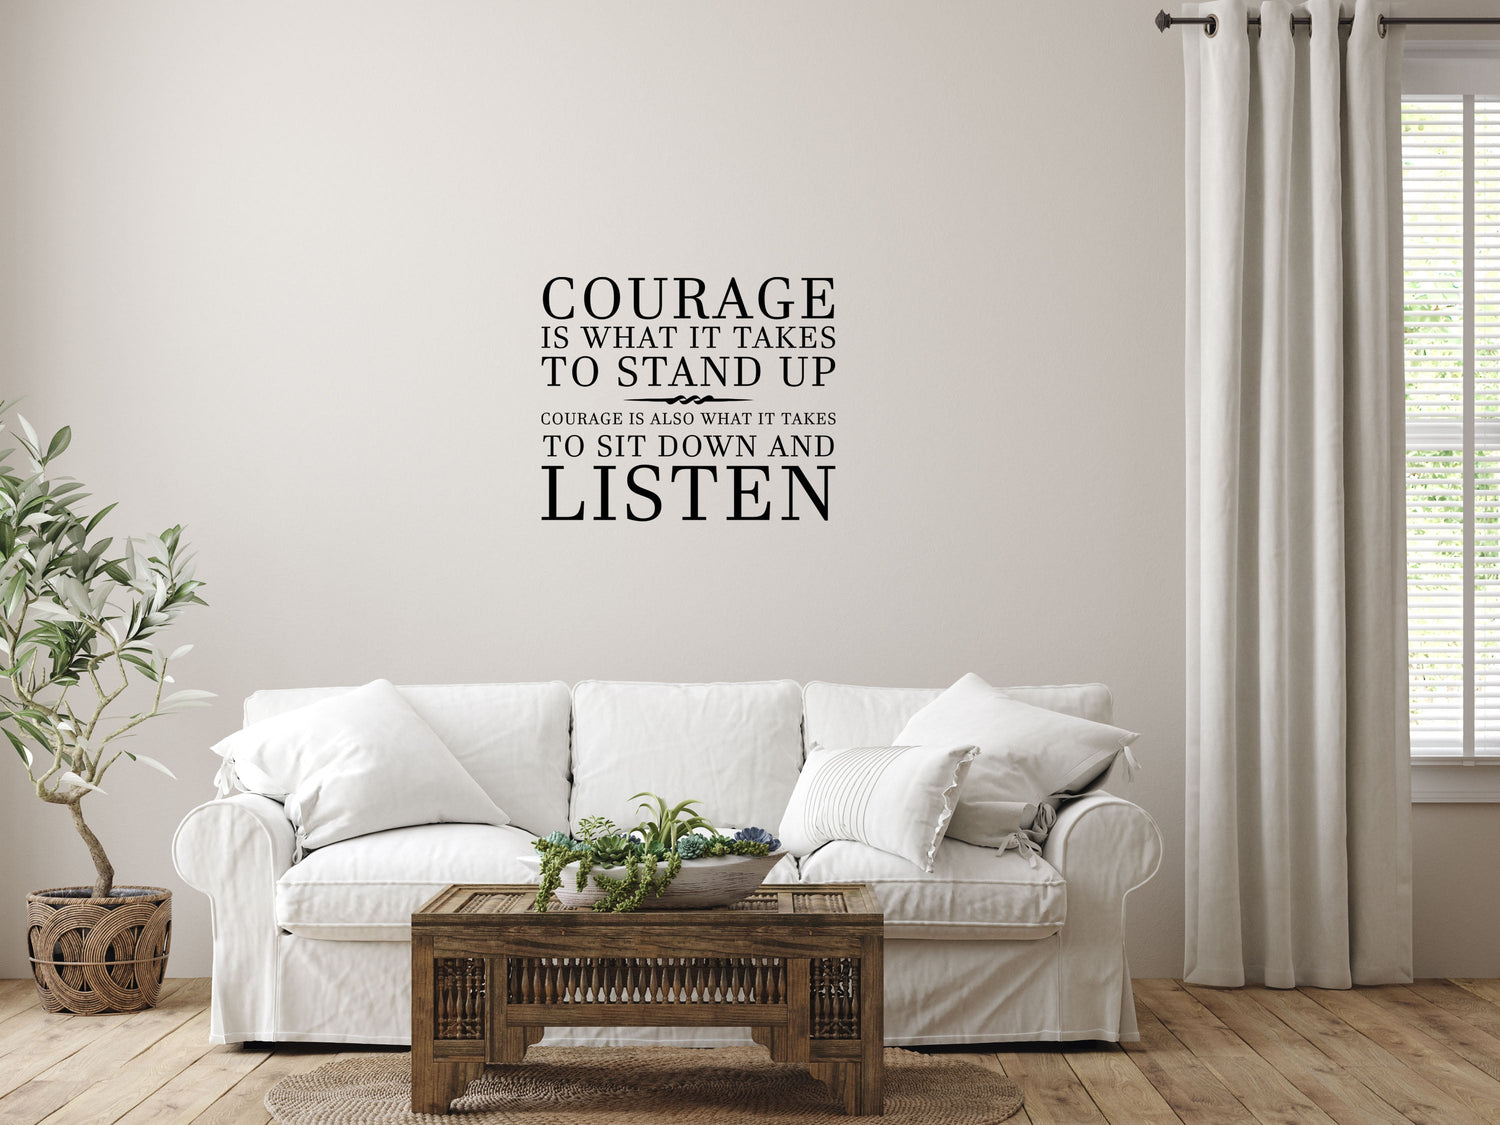 Courage Is What It Takes Vinyl Wall Decal Winston Churchill Wall Decal Handmade Vinyl Wall Art - Motivational Wall Decal Wall Quote Vinyl Wall Decal Inspirational Wall Signs 